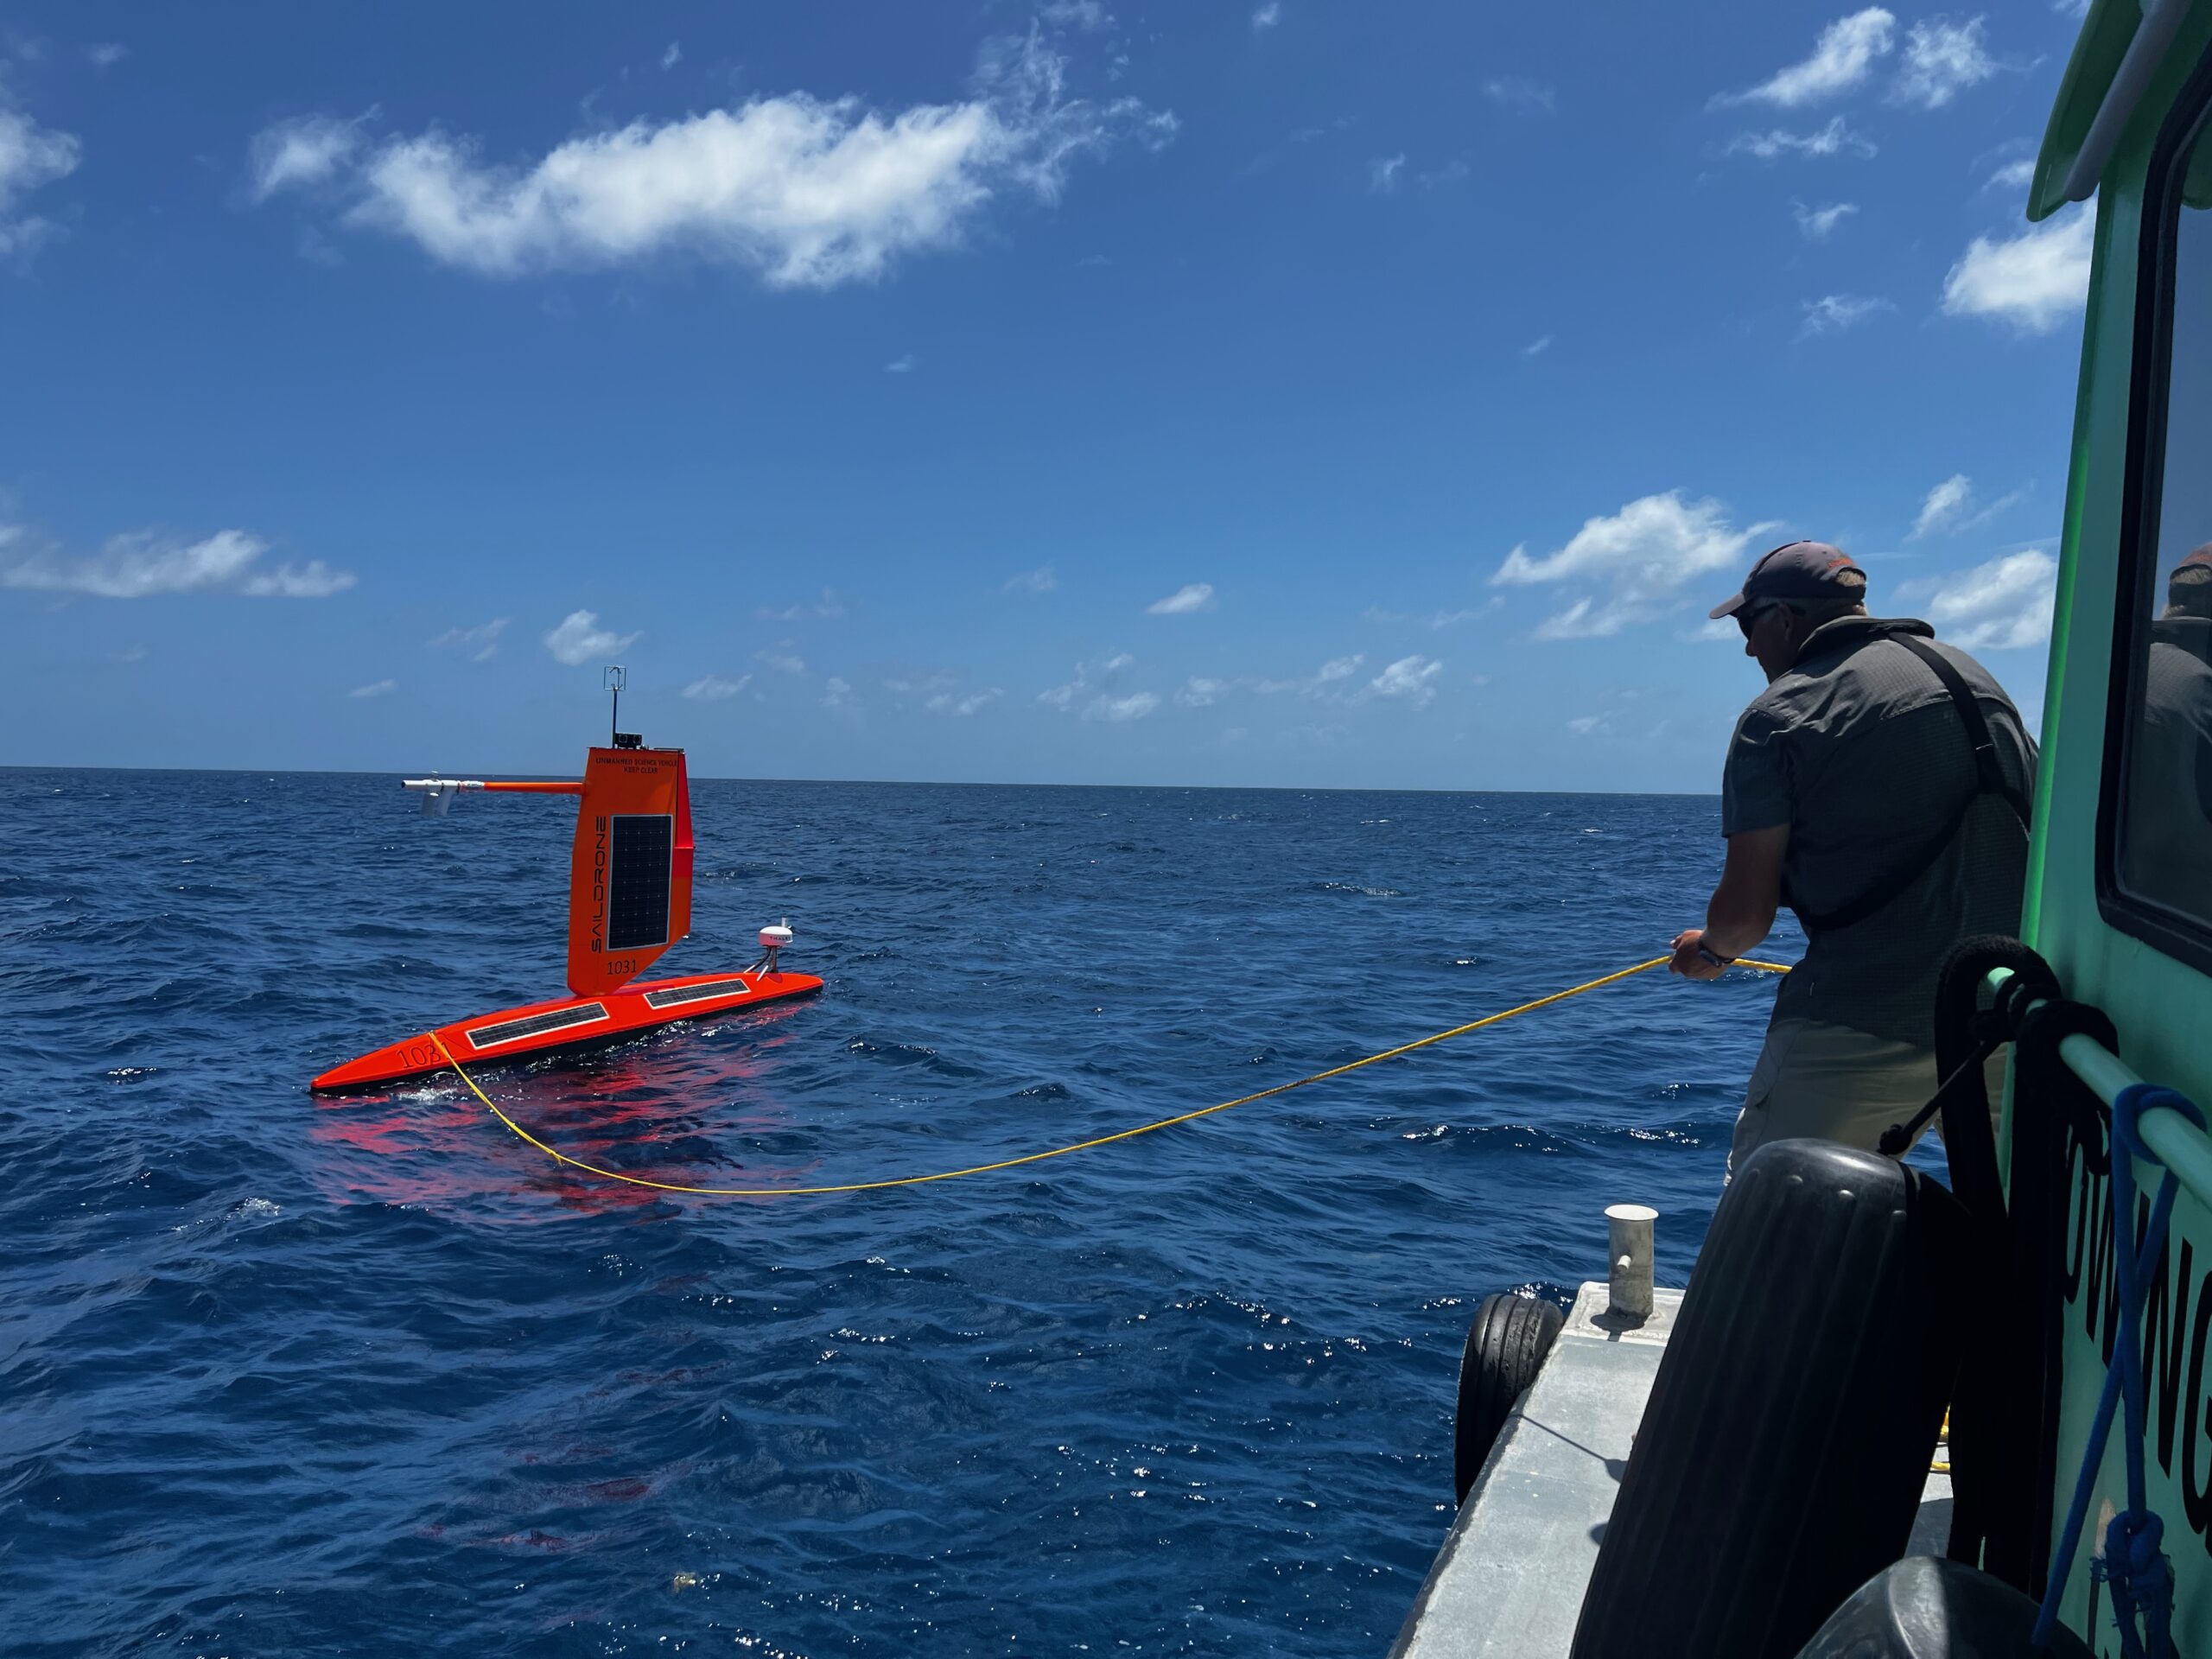 Saildrone Set to Deploy Record Number of Drones to Chase Hurricanes